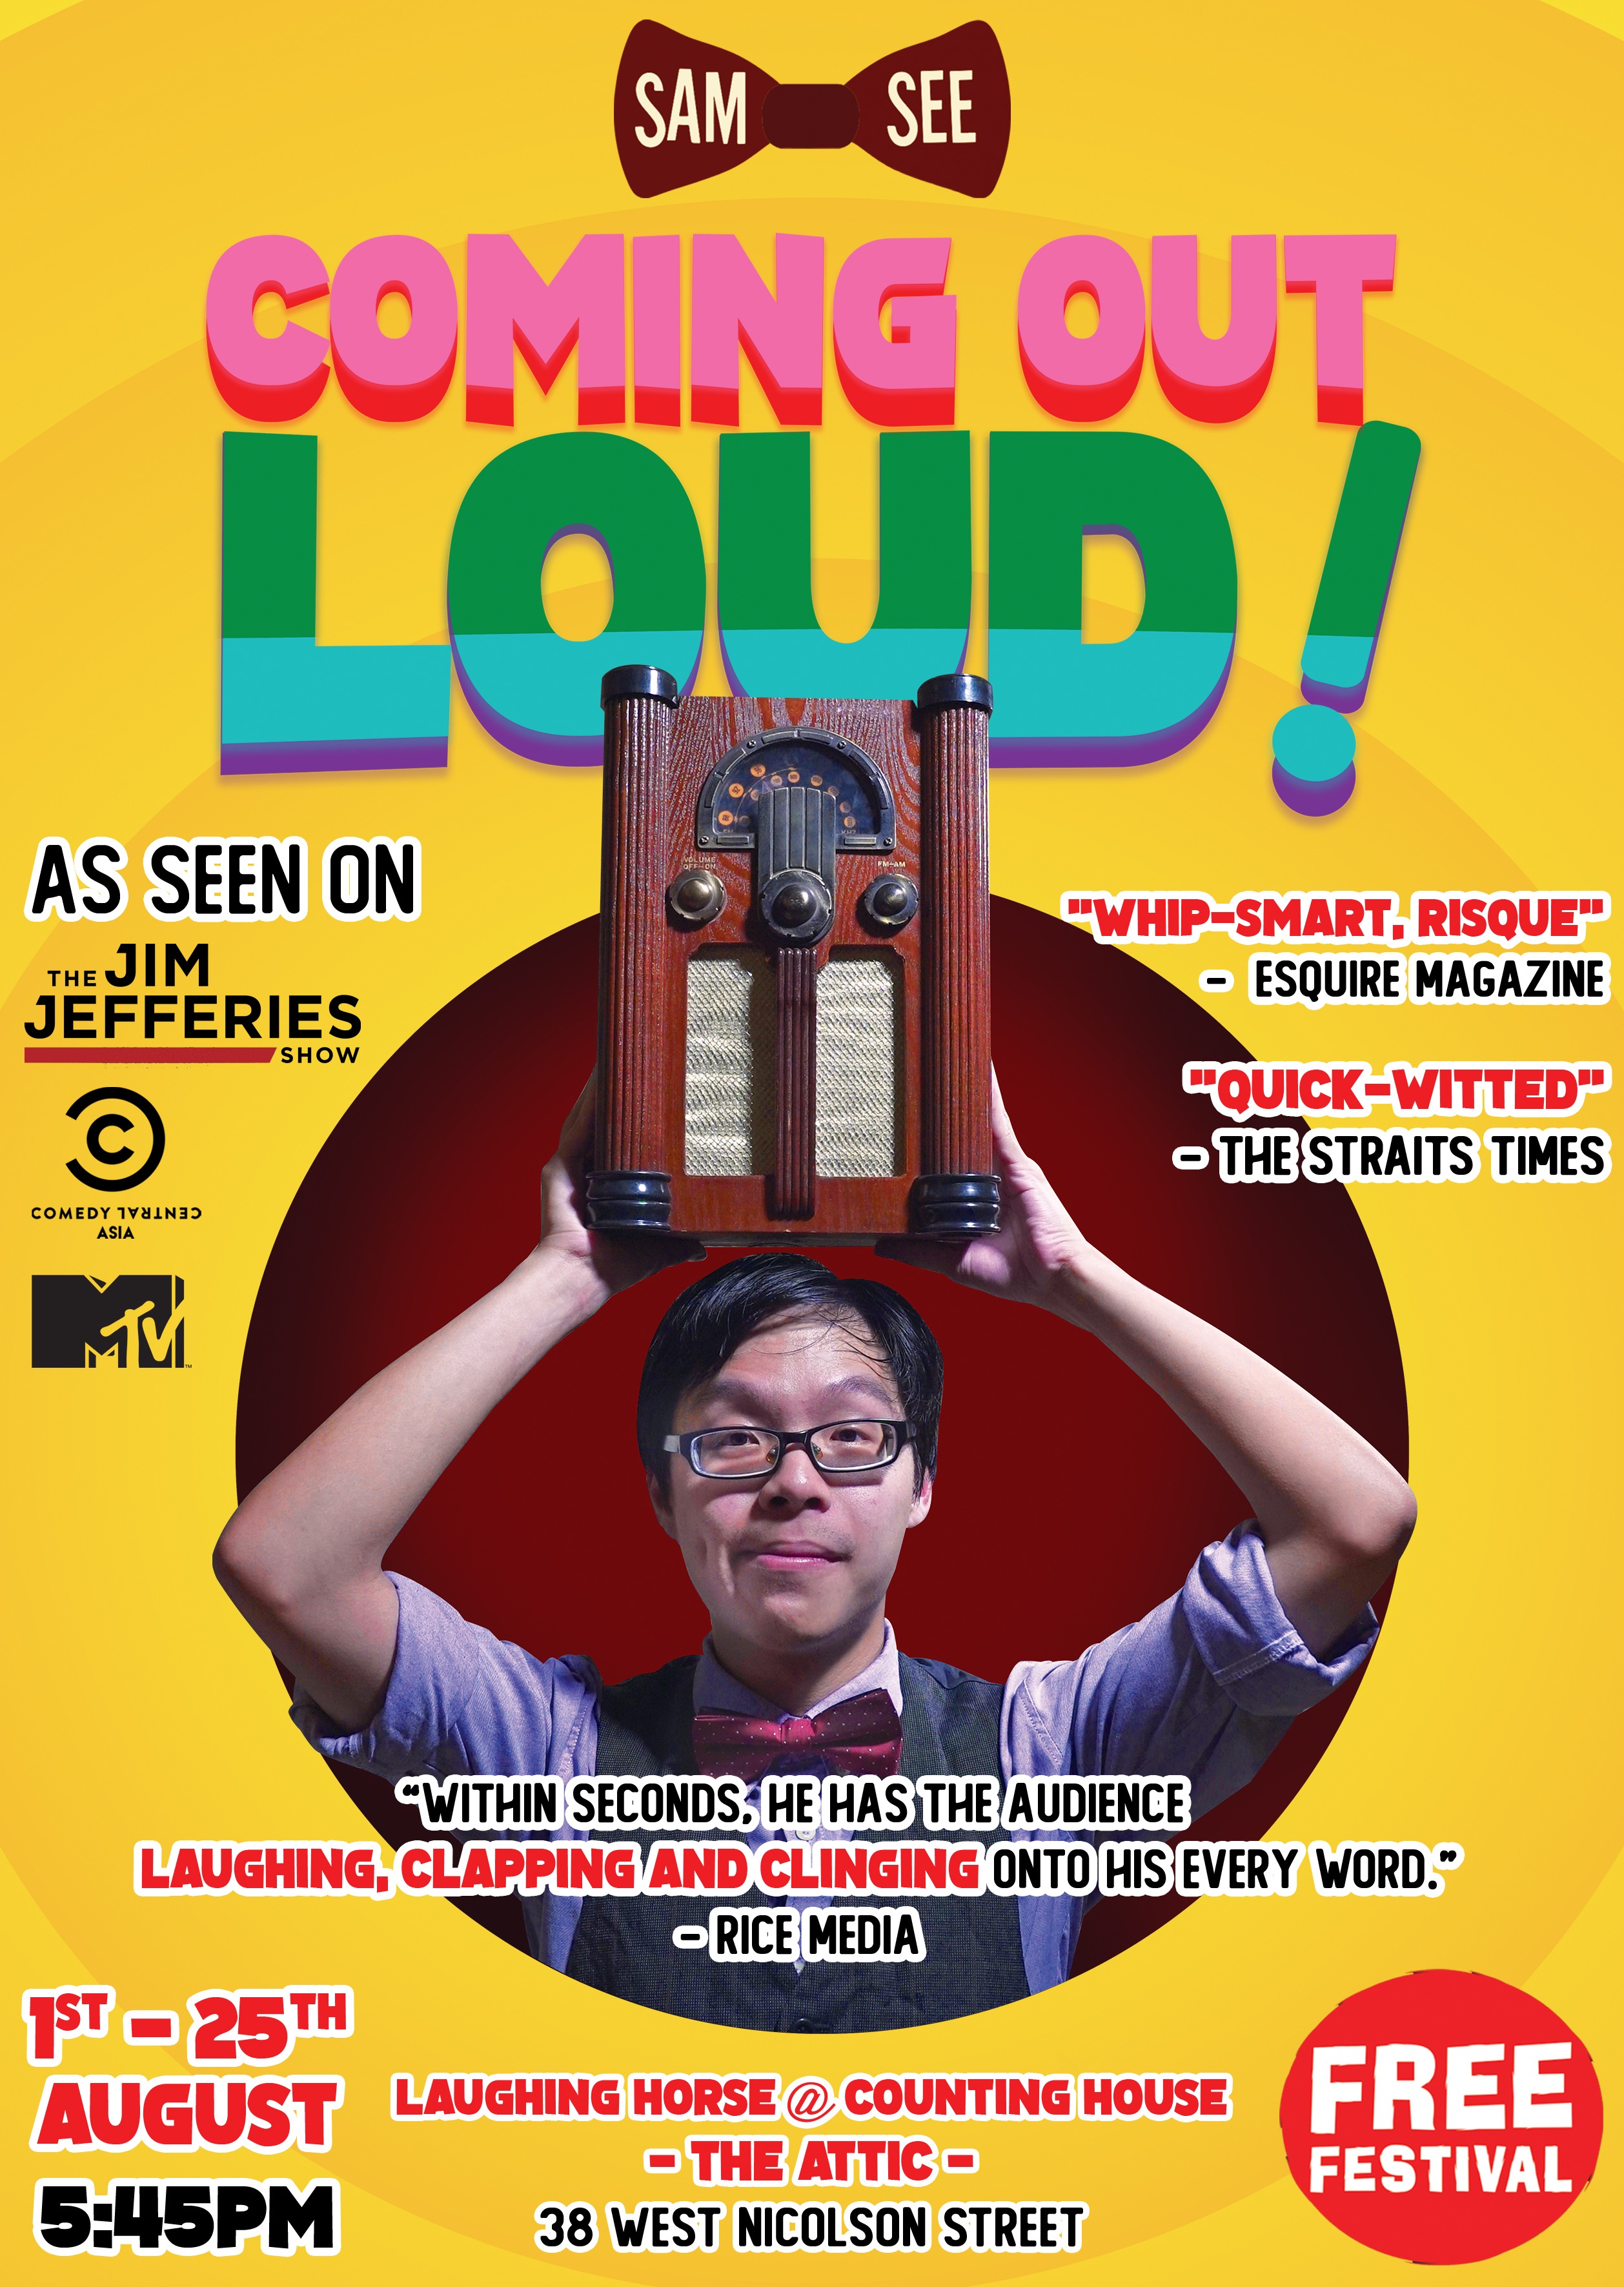 The poster for Sam See: Coming Out Loud